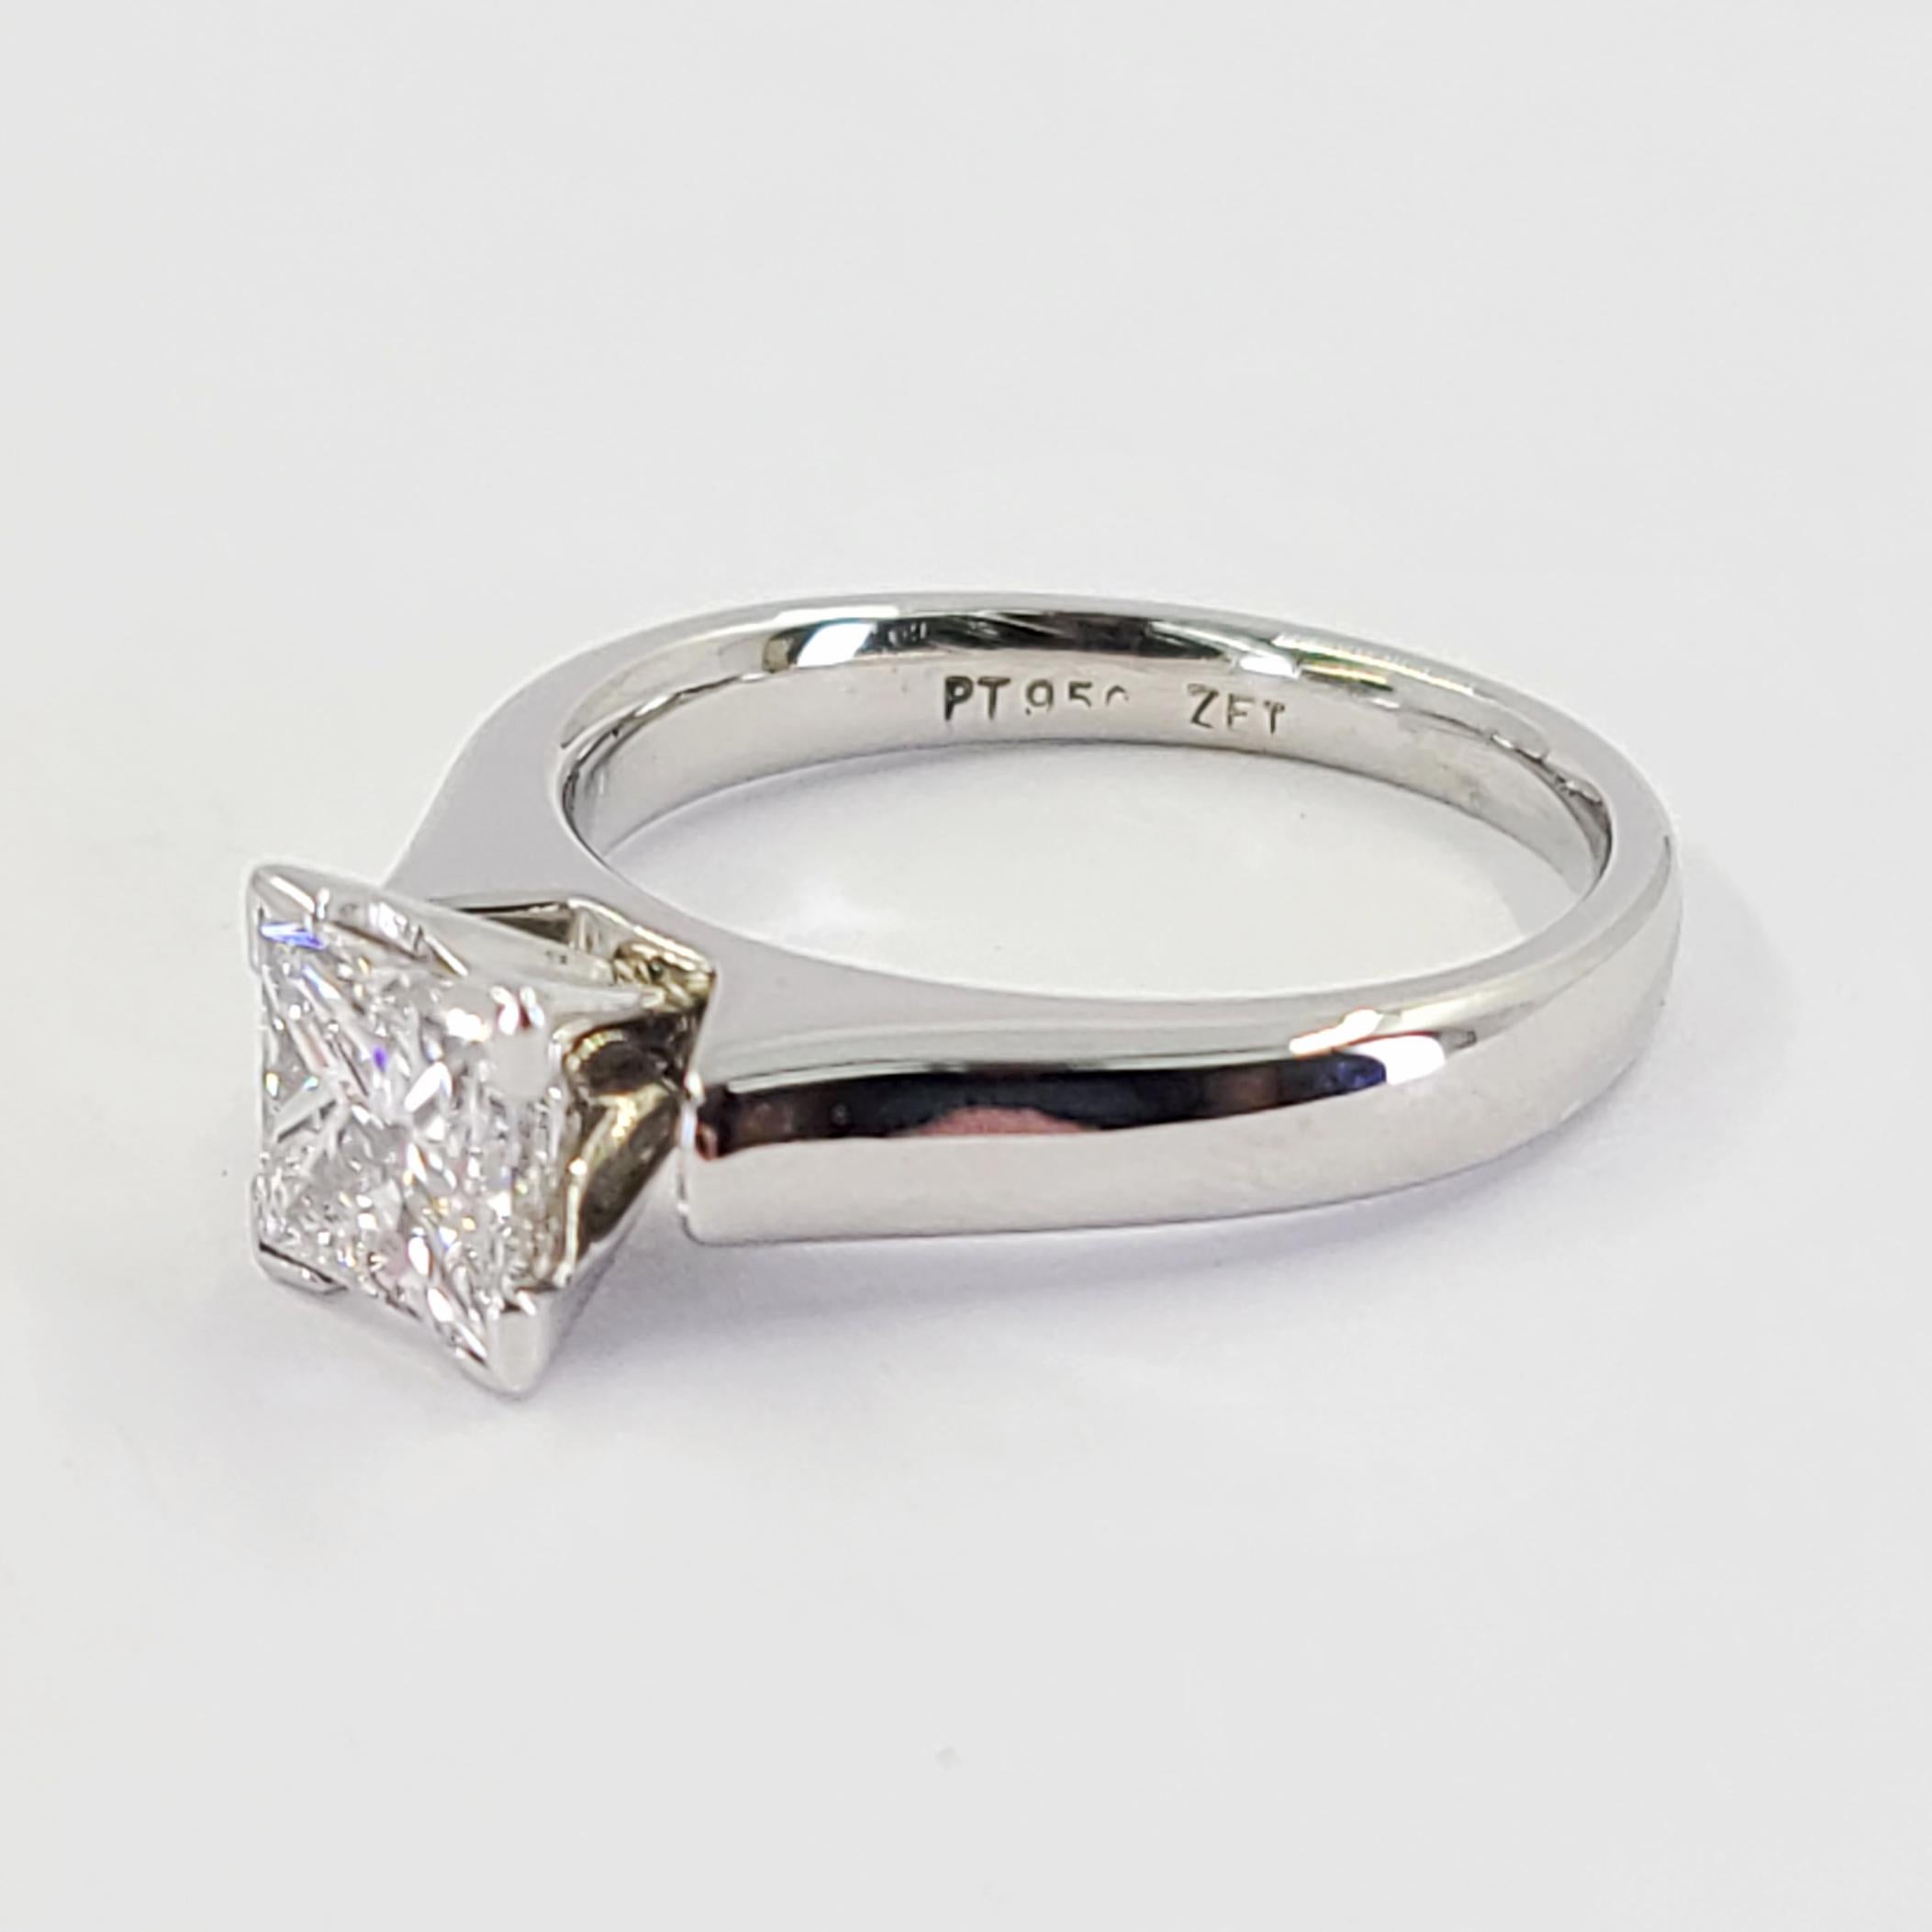 Platinum Diamond Solitaire Engagement Ring Featuring a 1.02 Carat Princess Cut Diamond GIA Graded (Report #12660532) As VS2 Clarity & G Color. Finger Size 5.5; Purchase Includes One Sizing Service. Finished Weight Is 7.6 Grams.